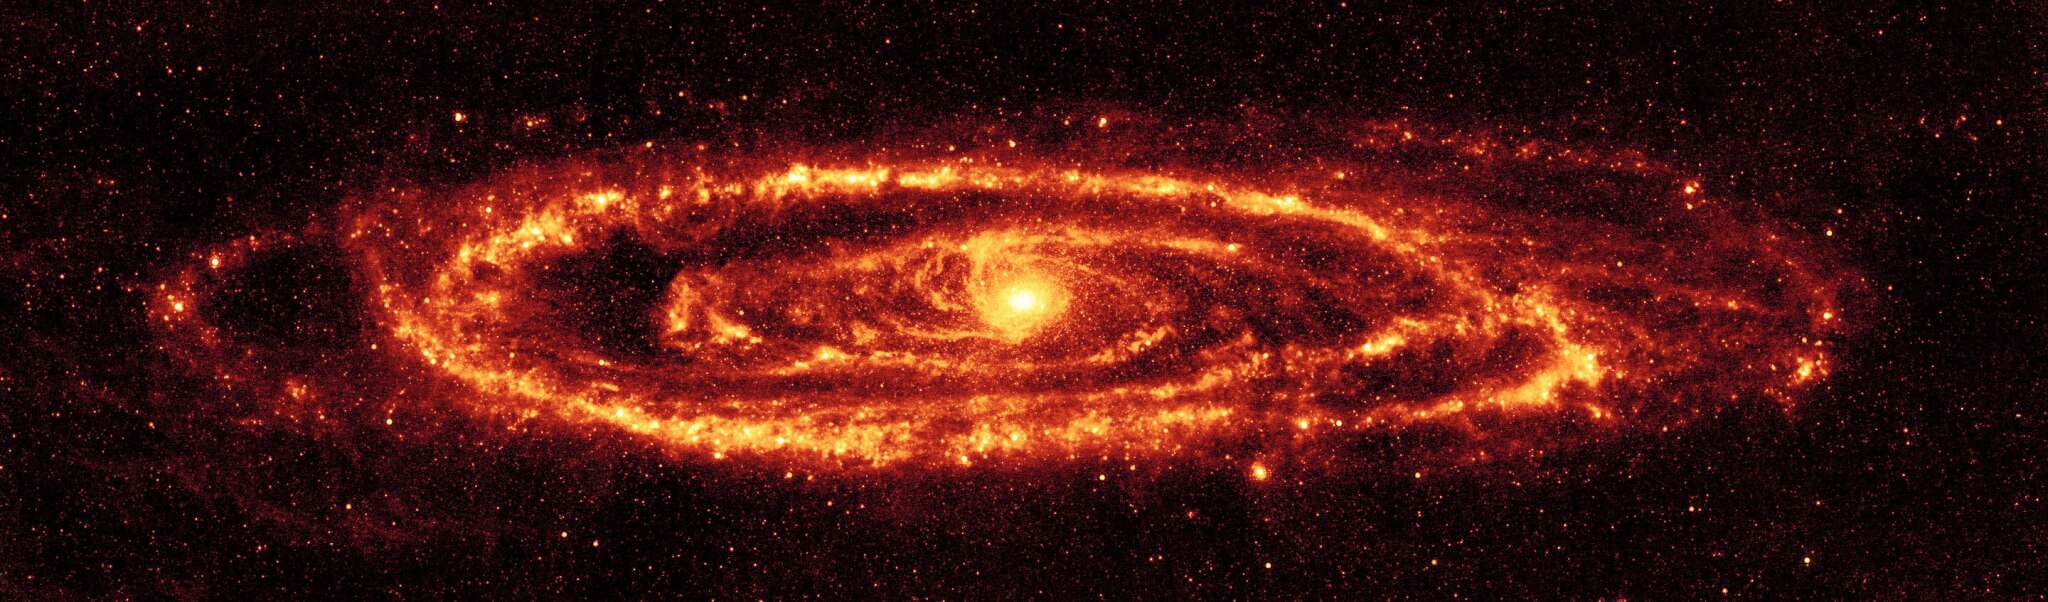 Andromeda Galaxy - What clock are you on?